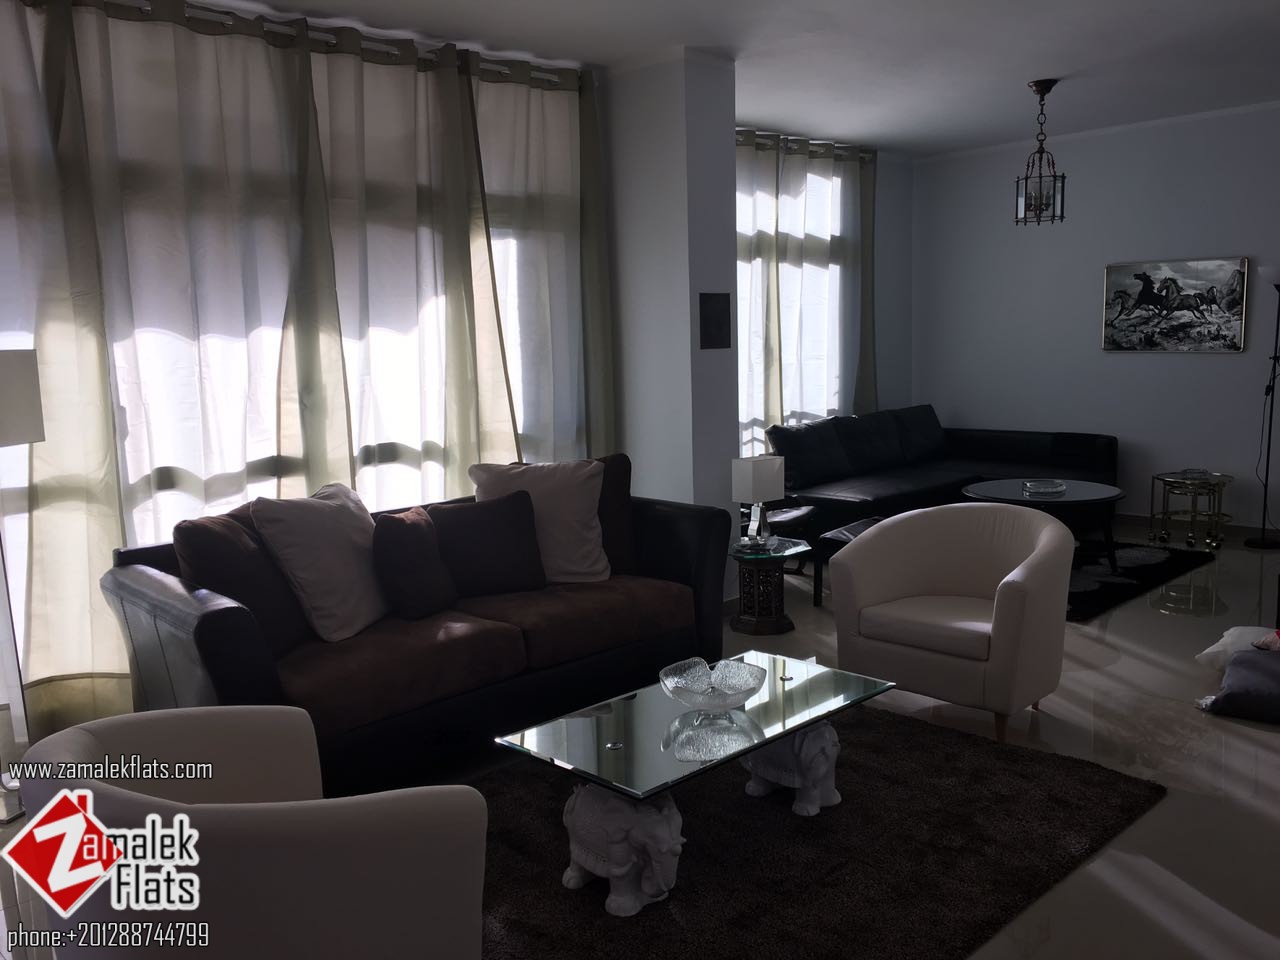 Shopping area apartment for rent in zamalek